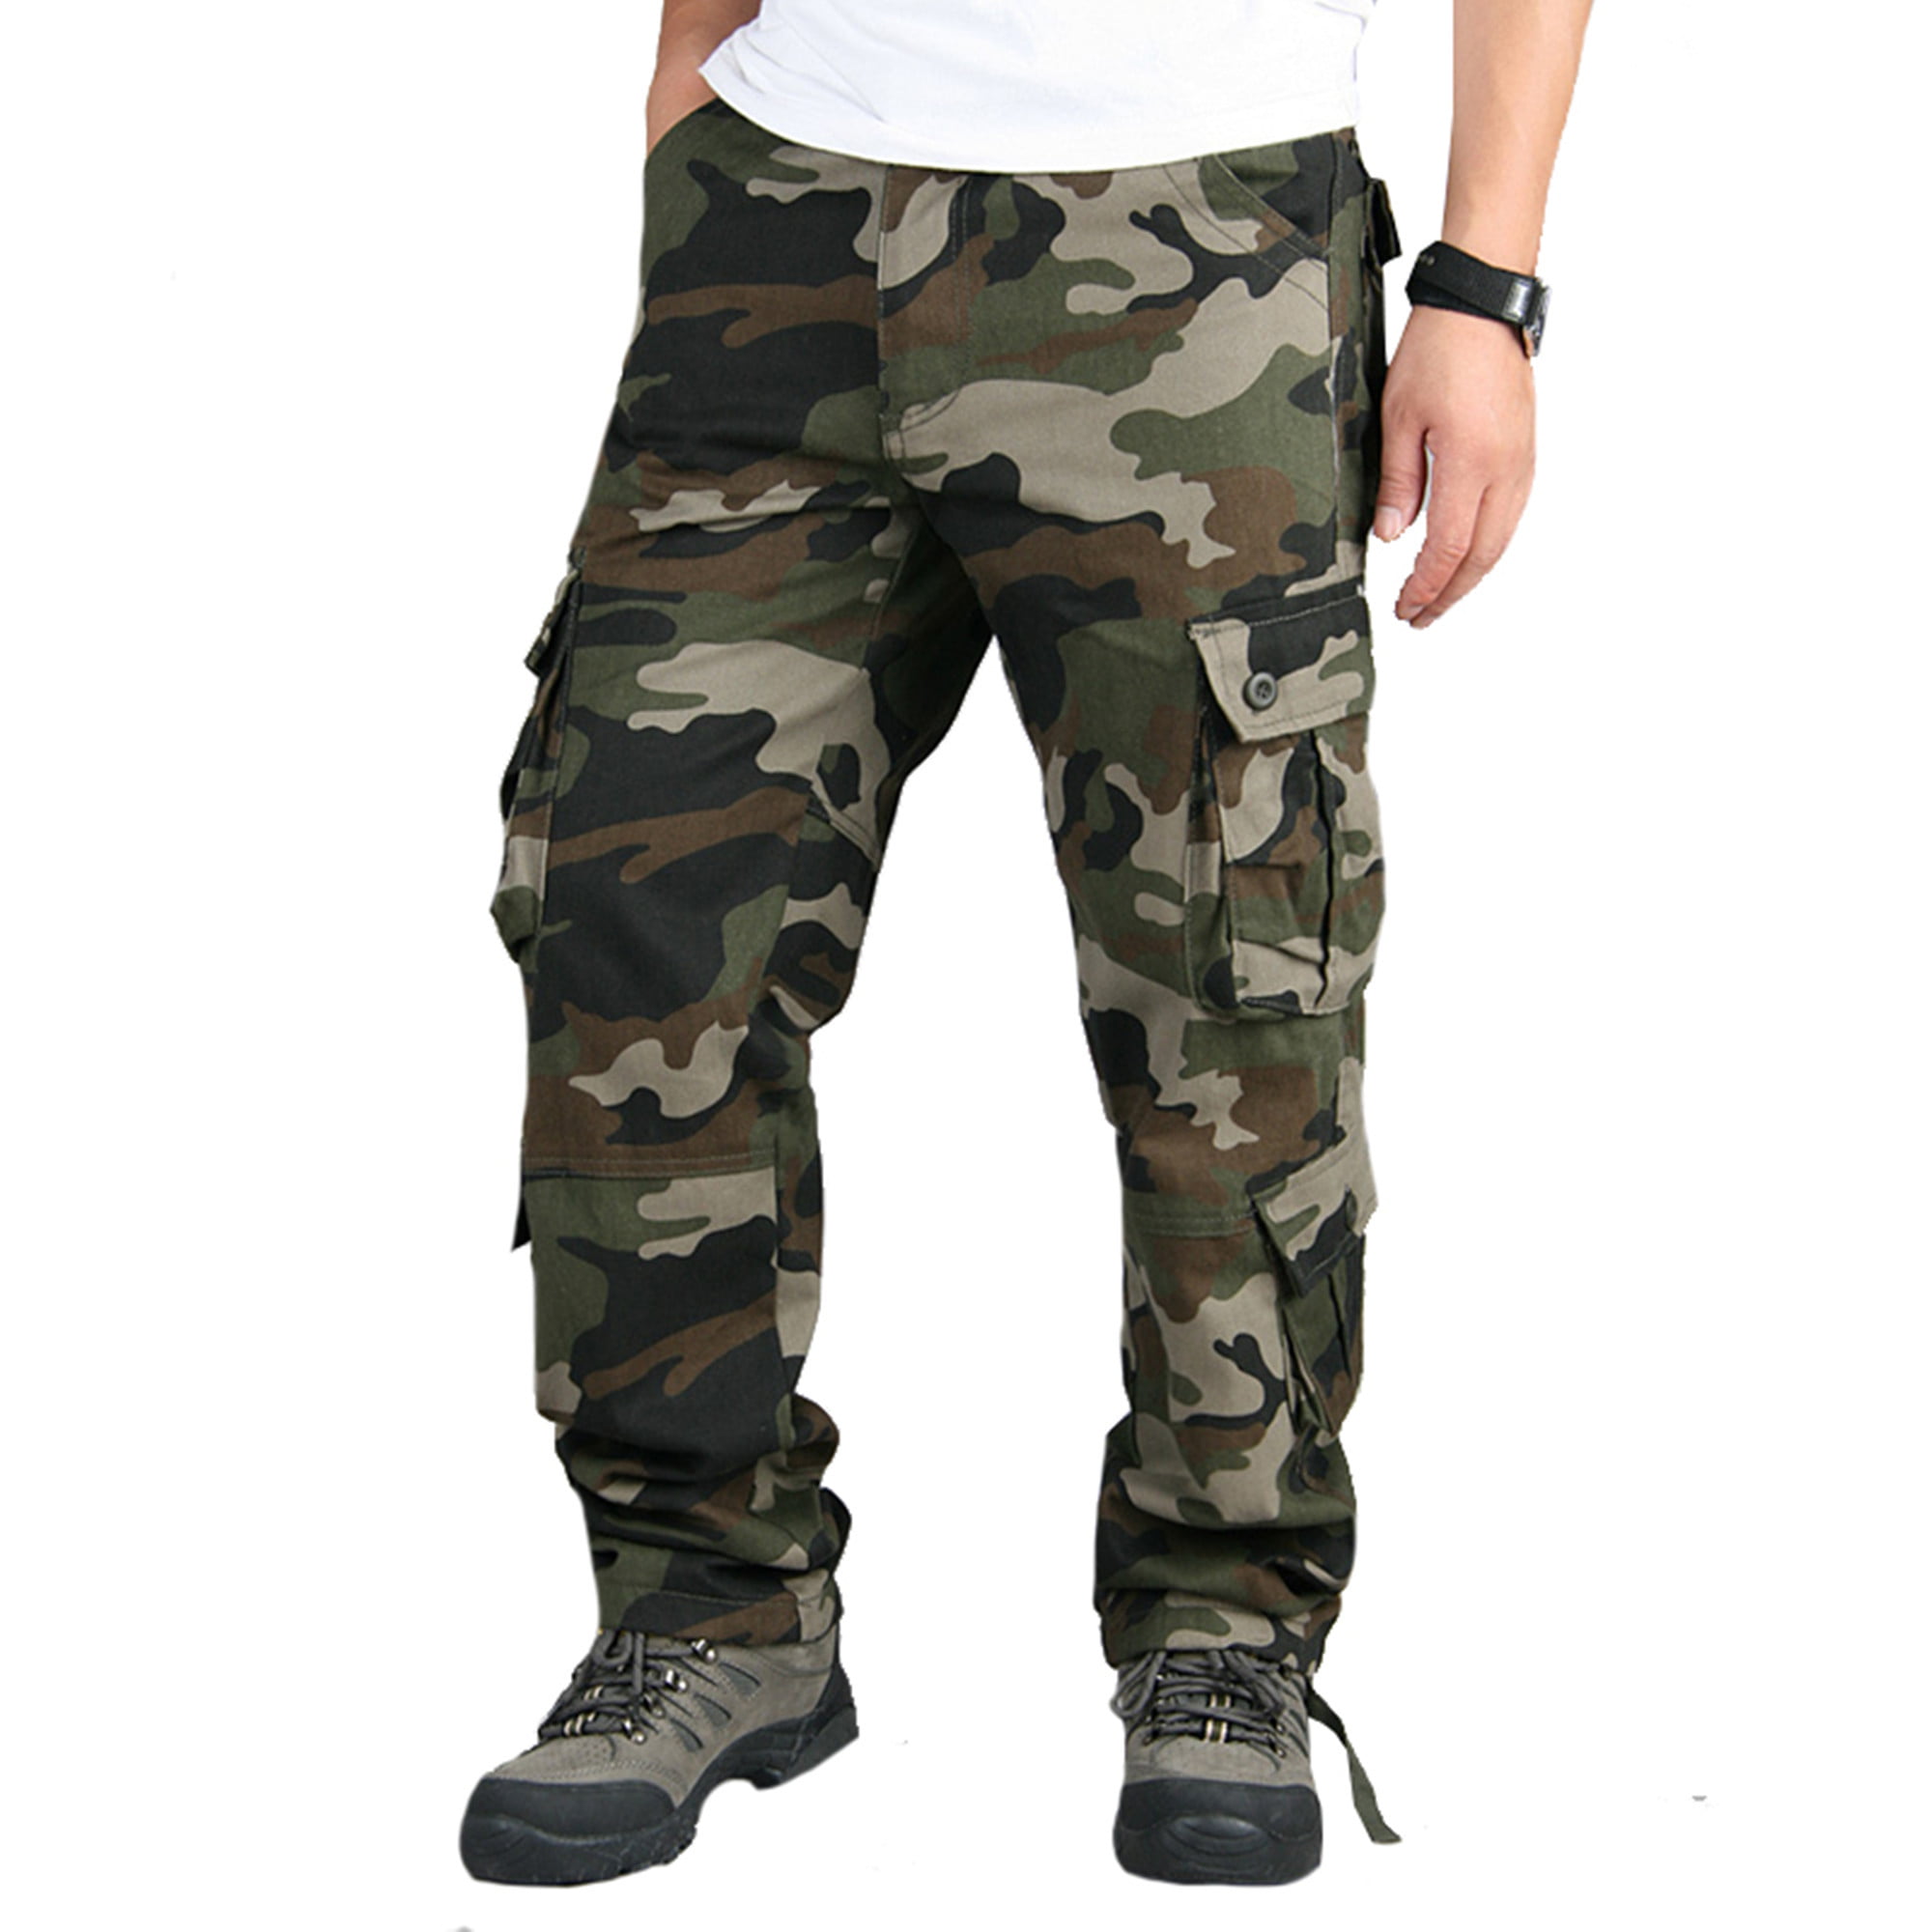 Mens Military Camo Cargo Work Combat Tactical Army Pants Hiking Trousers Outdoor 